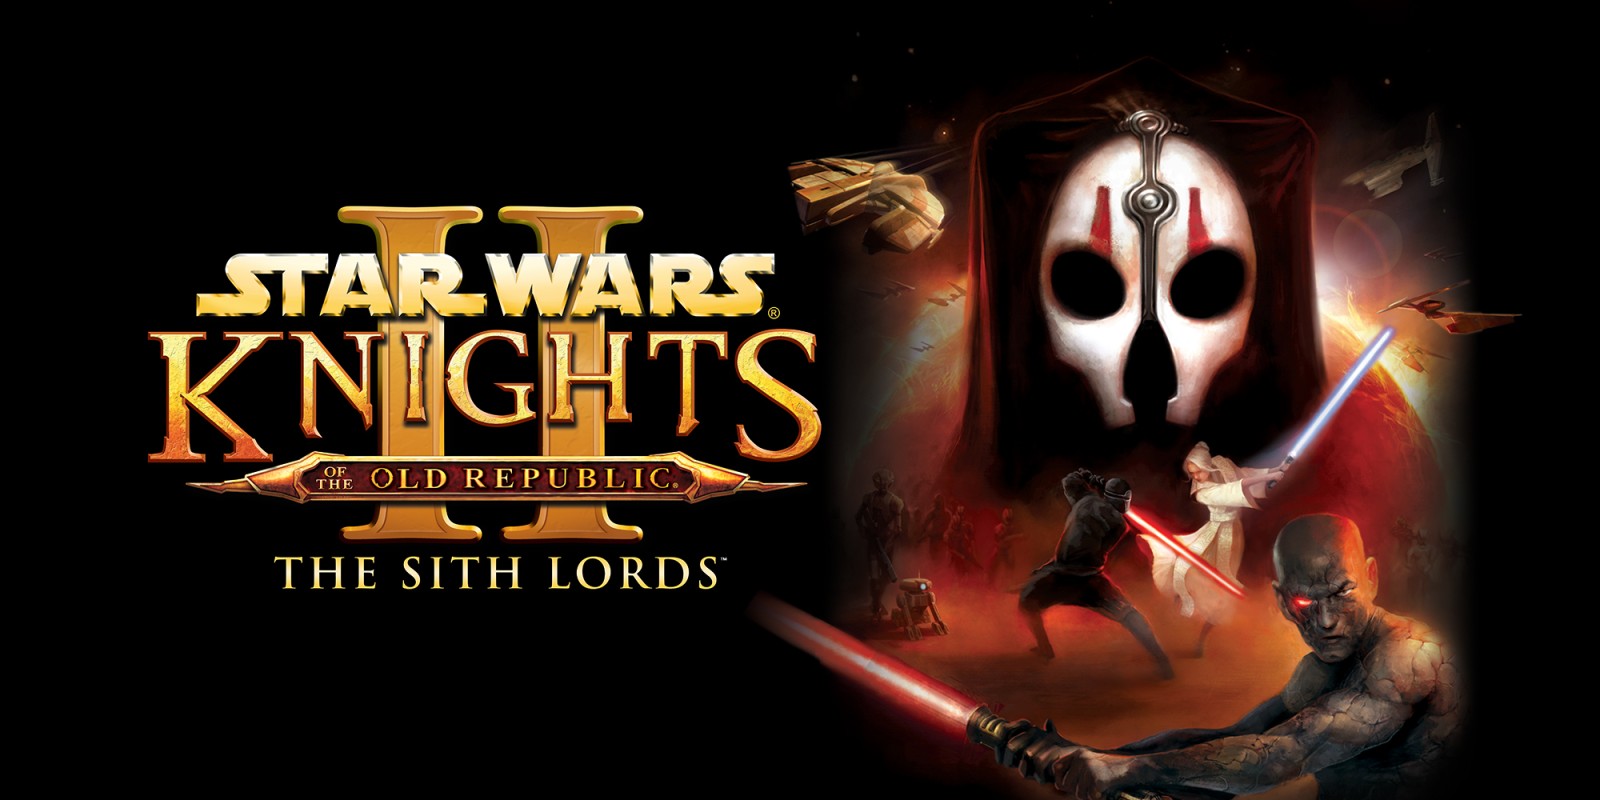 Star Wars Knights of the Old Republic II Restored Content DLC cancelled